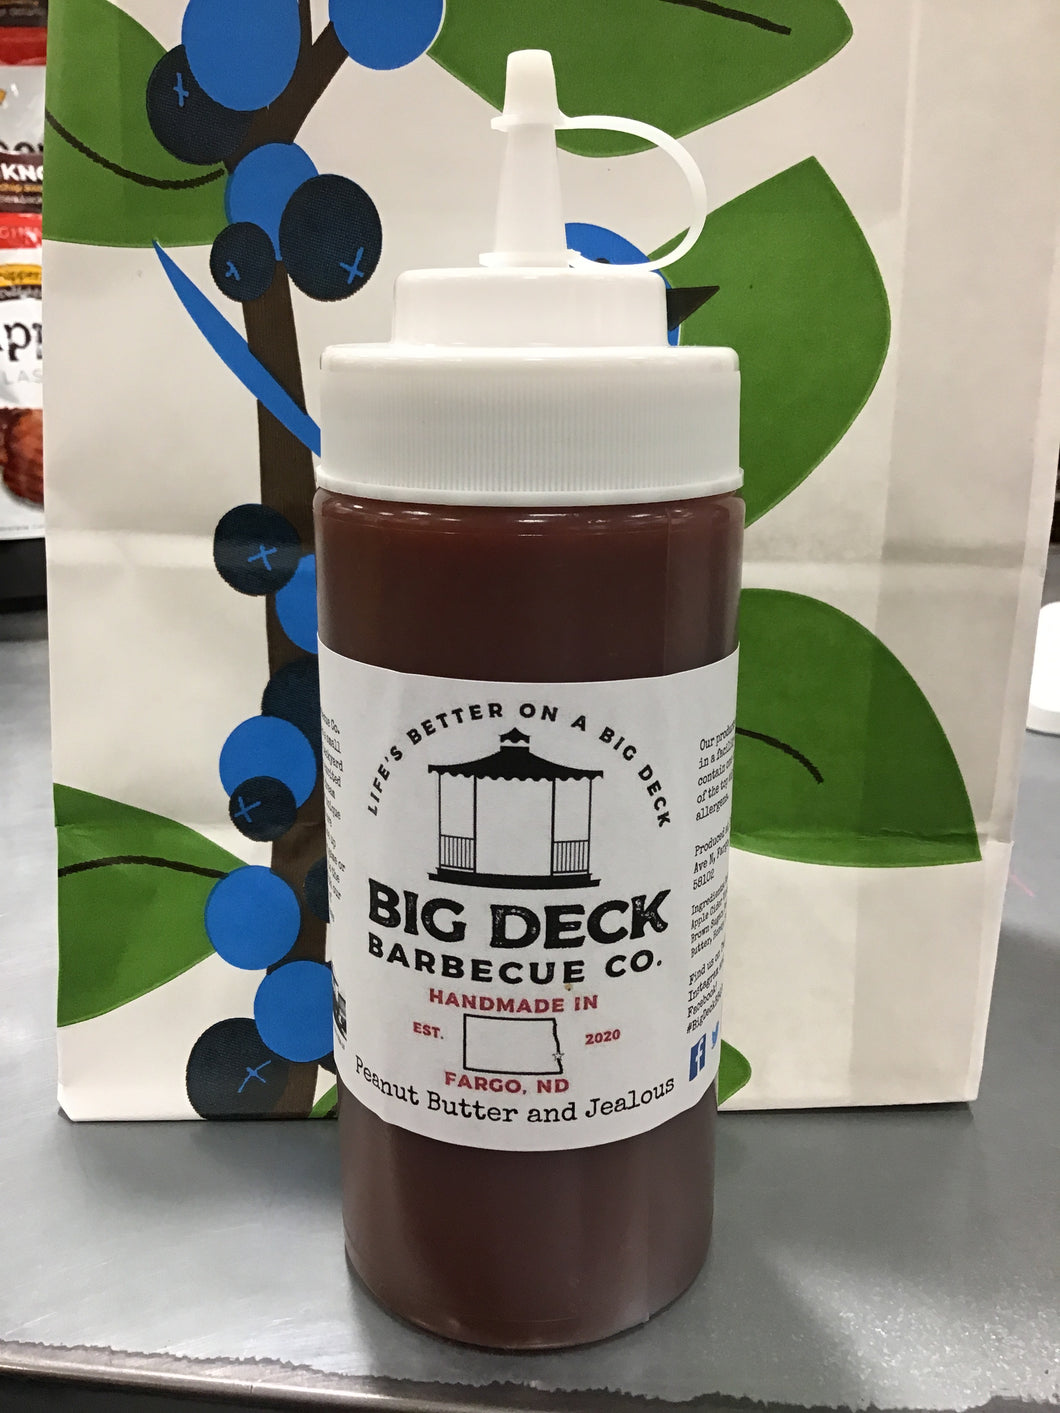 Big Deck Peanut Butter and Jealous Barbecue Sauce